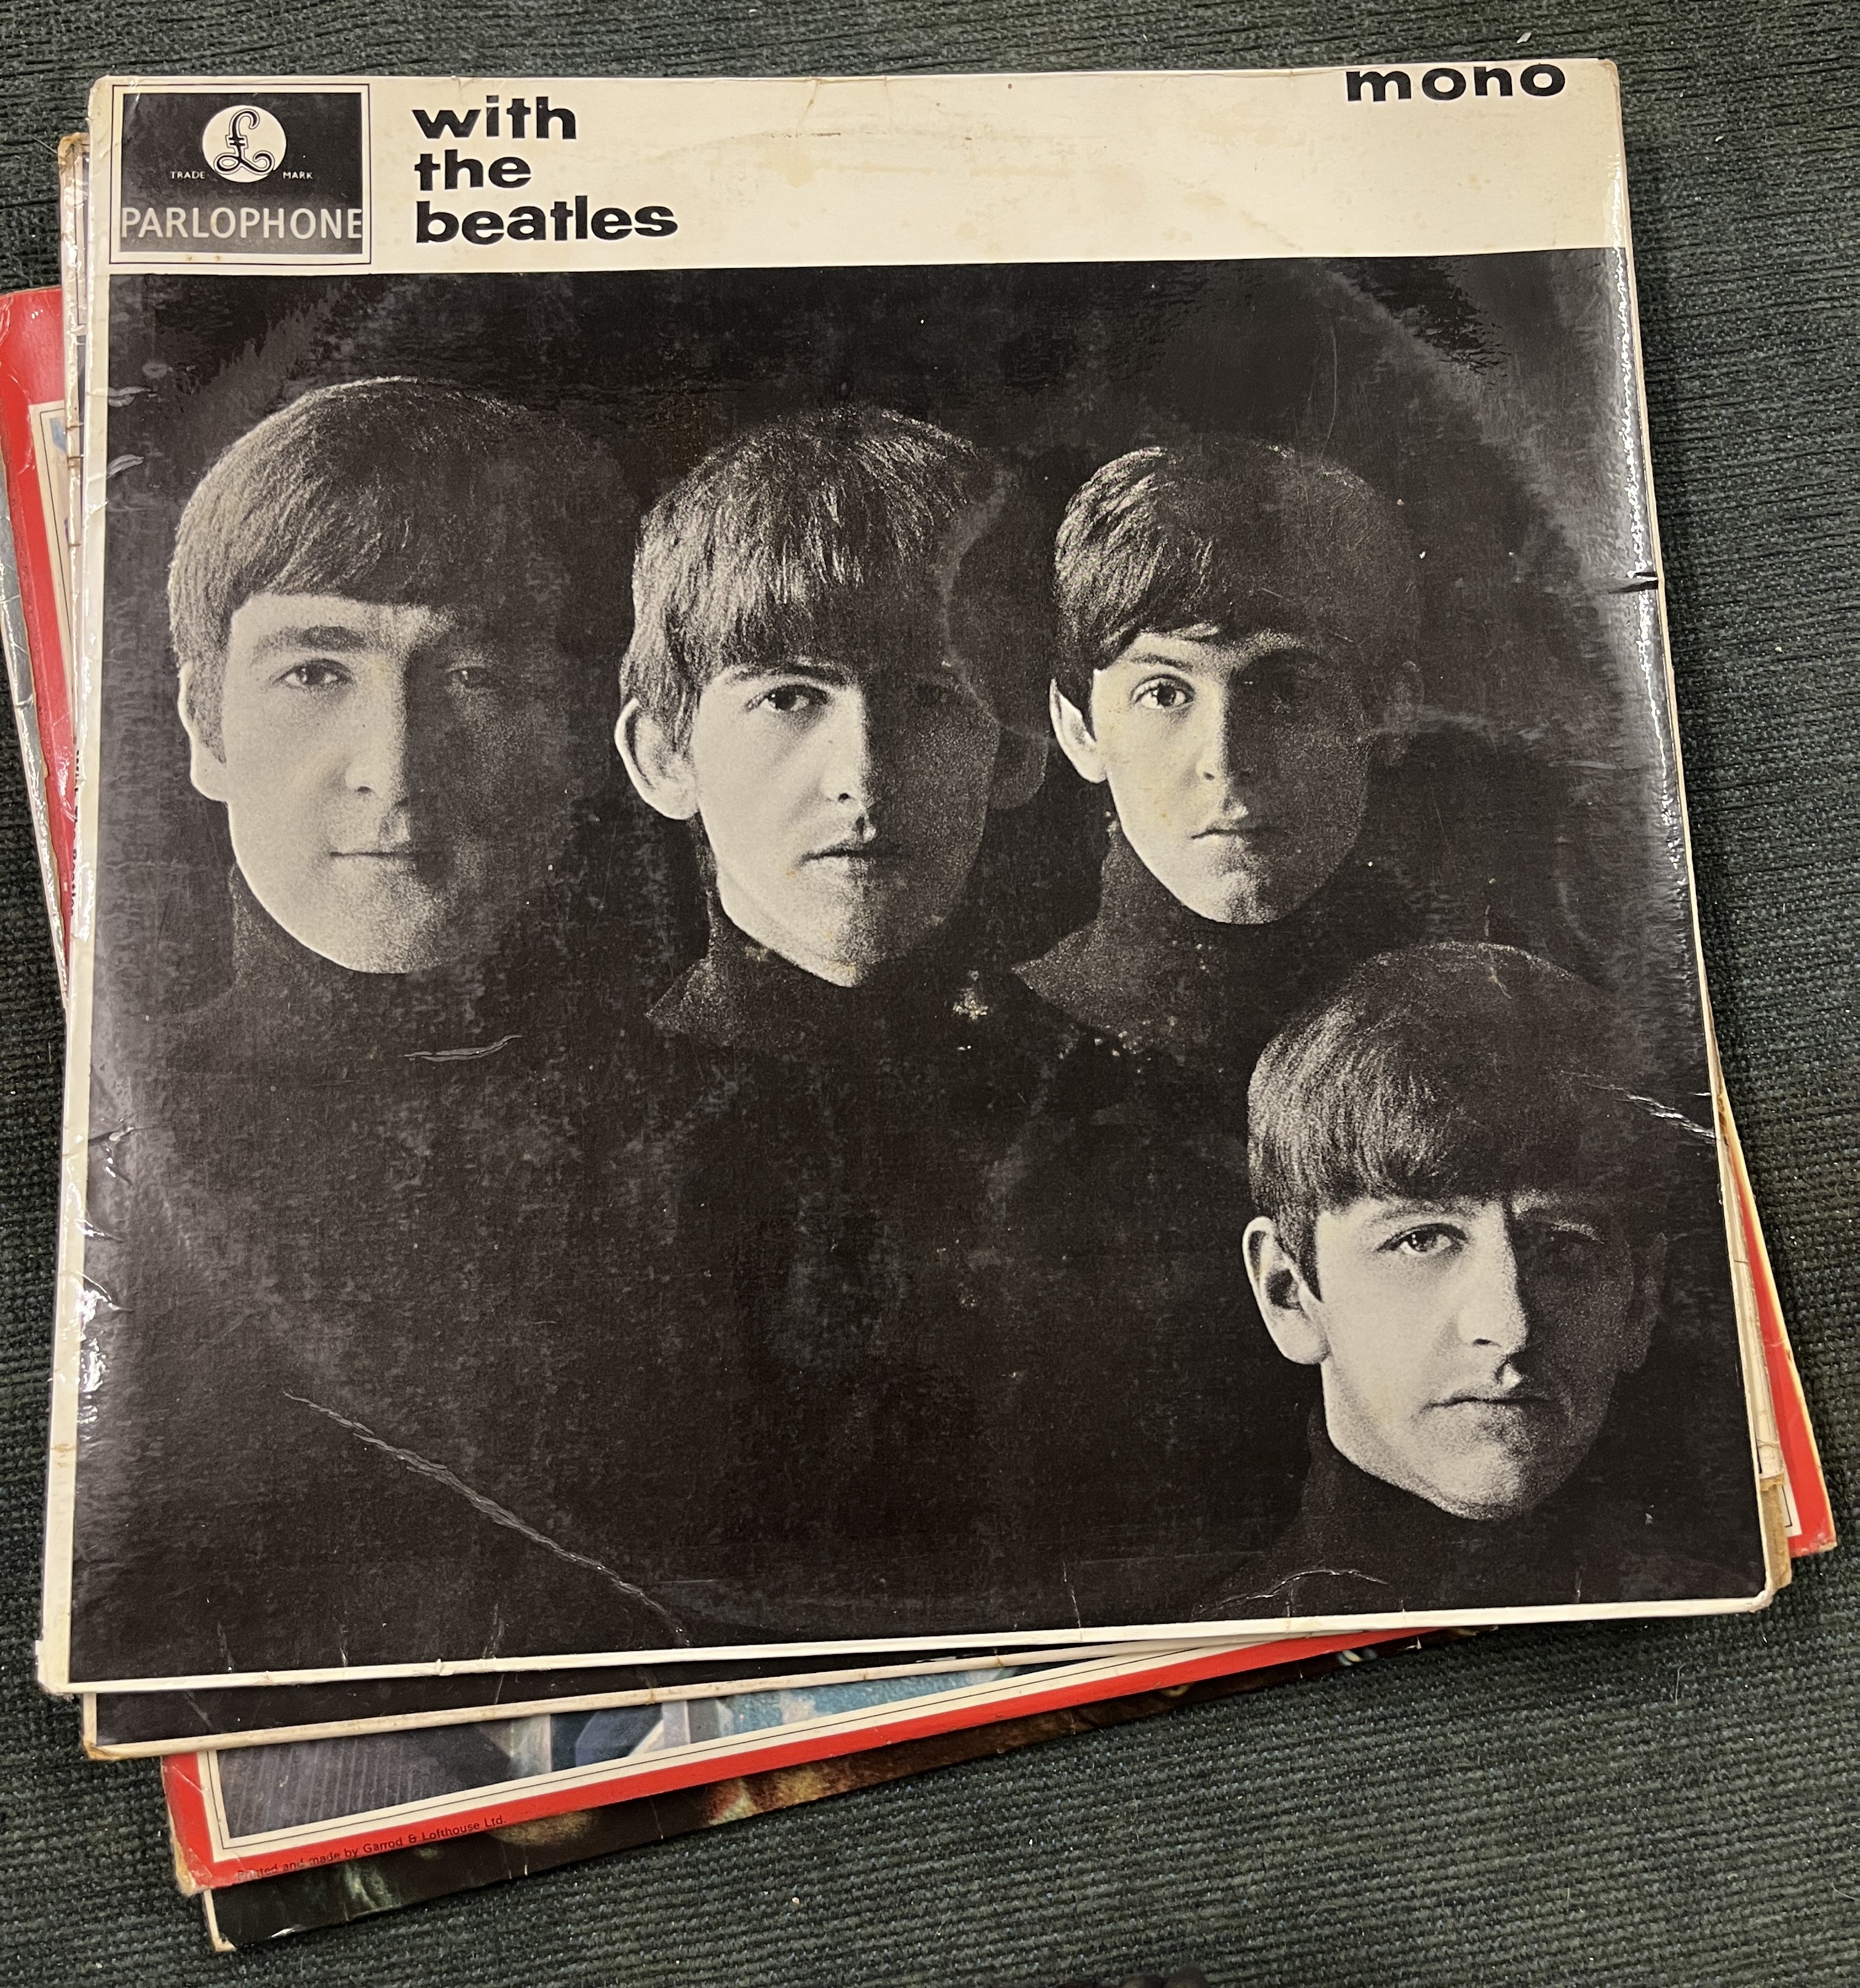 Beatle Lps - First pressing - Image 5 of 9